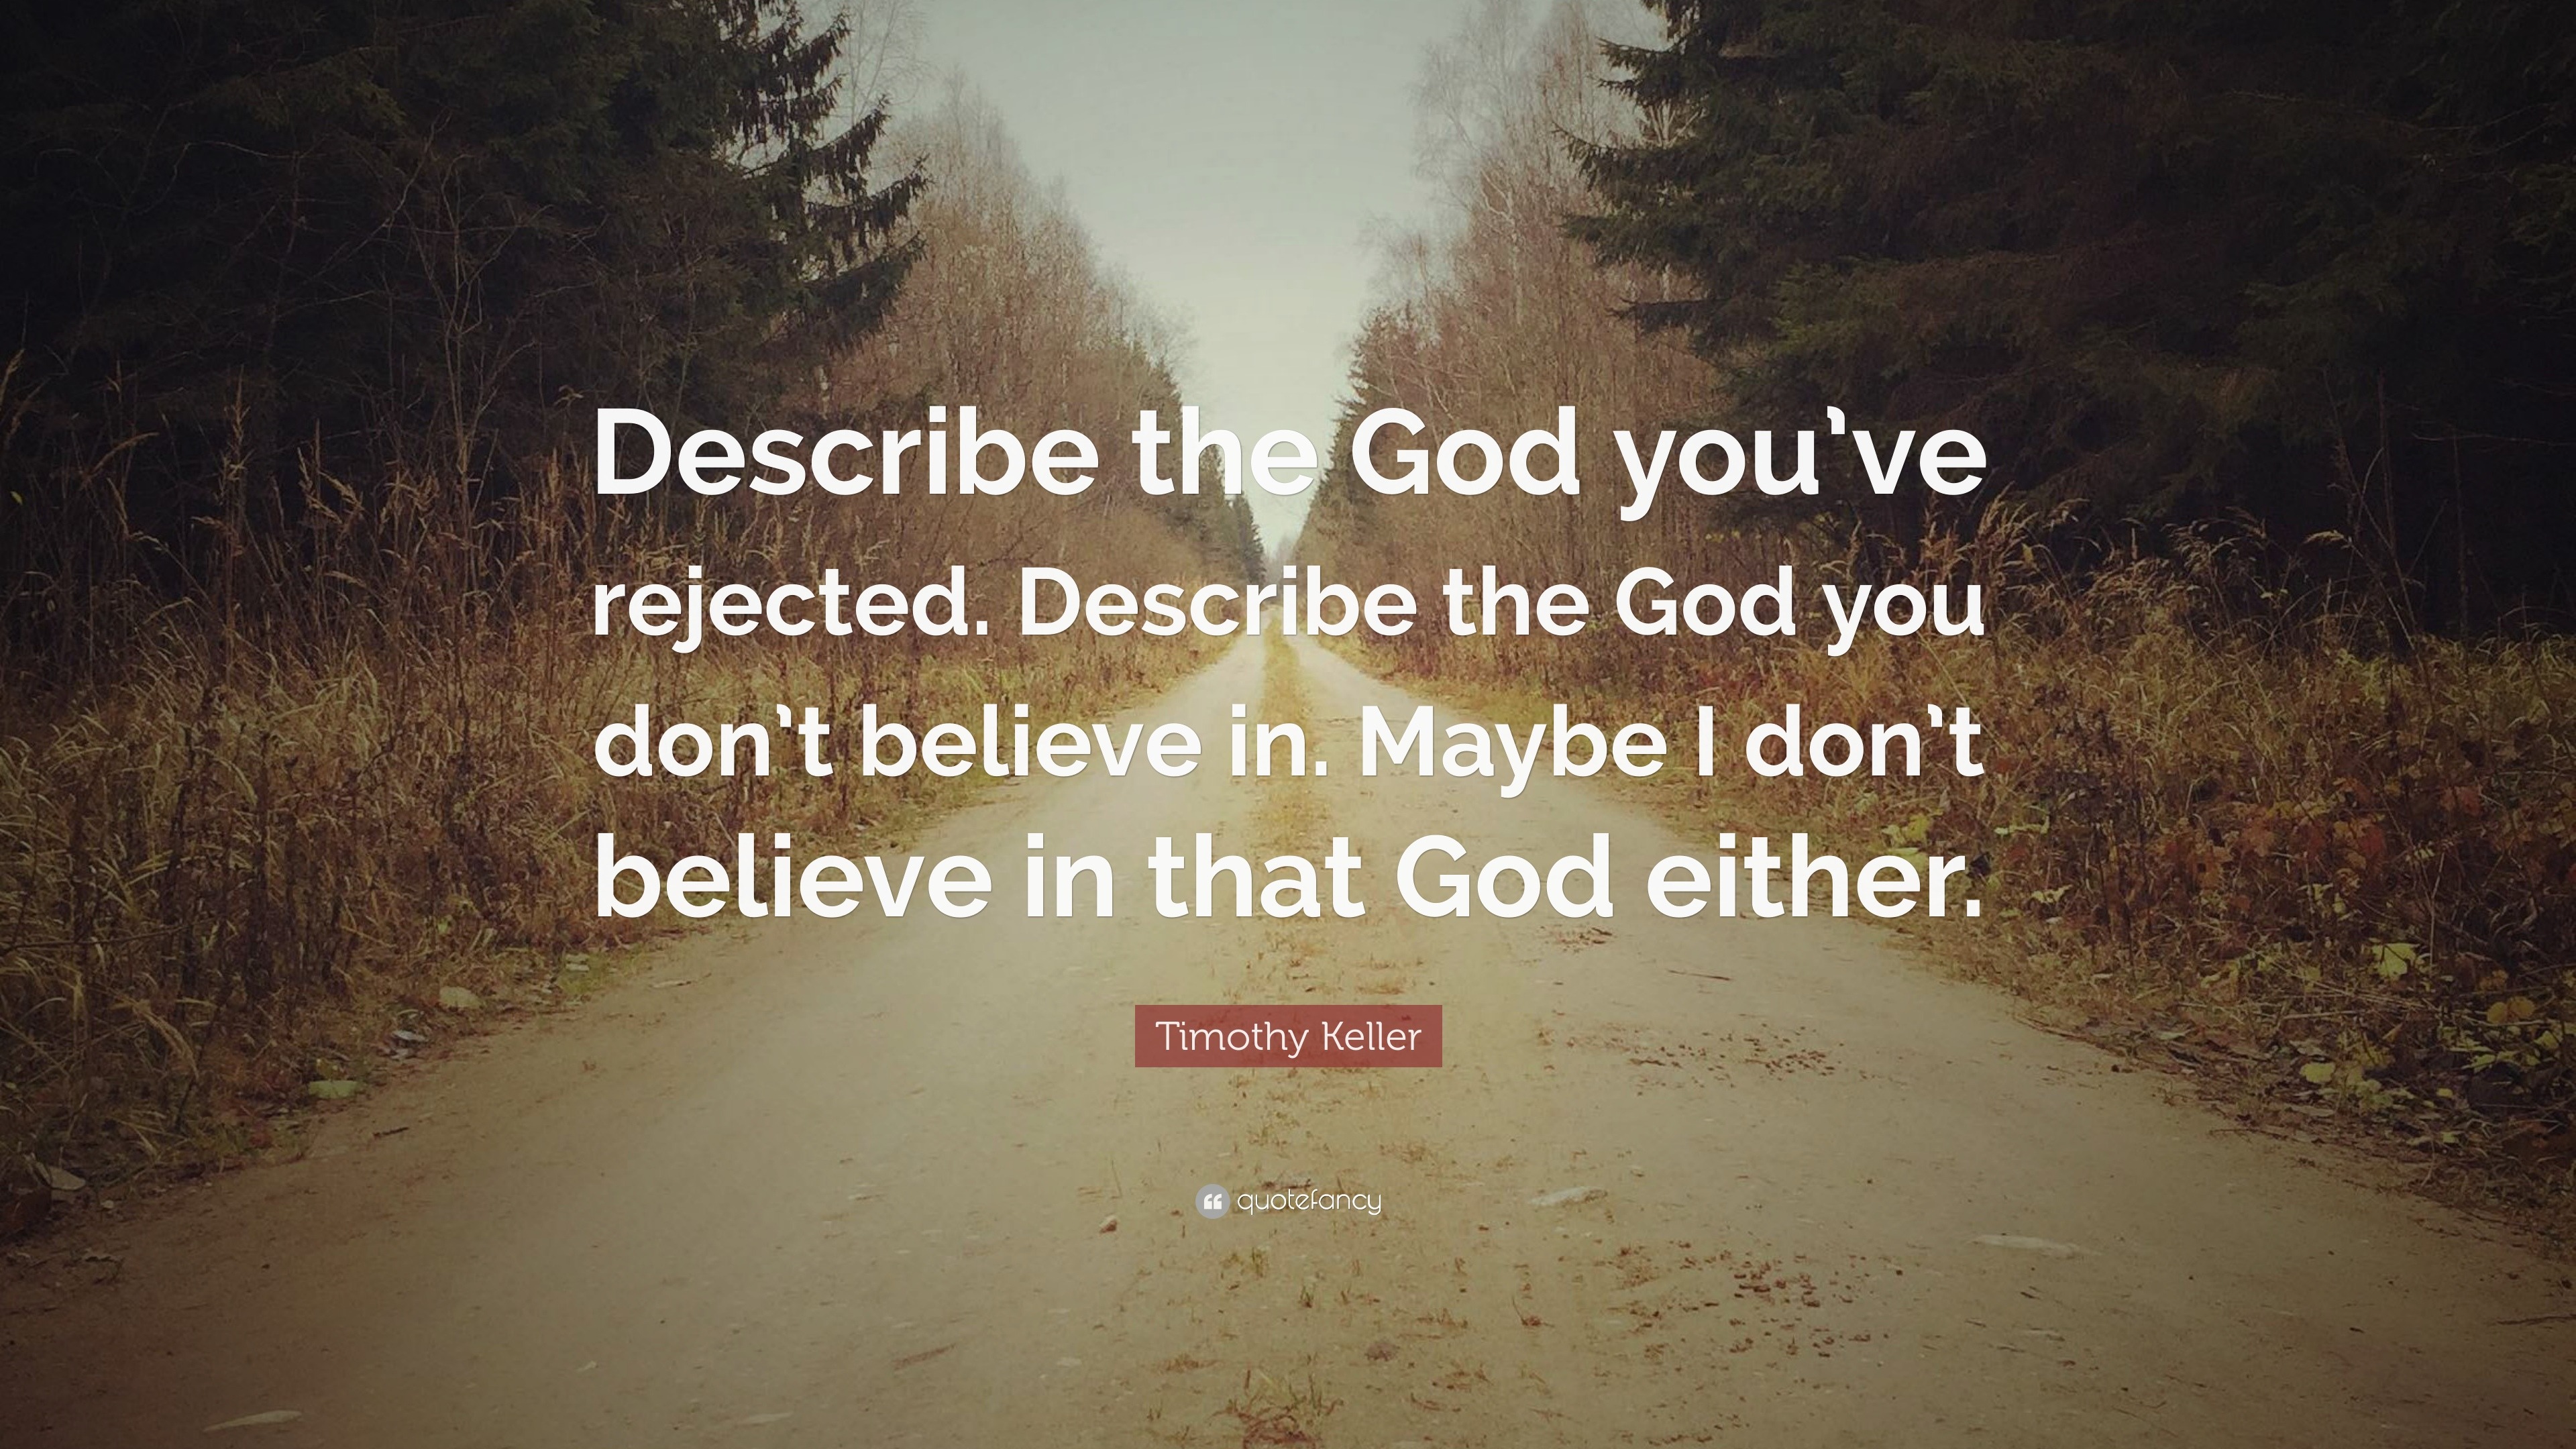 I Don't Believe in (that) God, Either